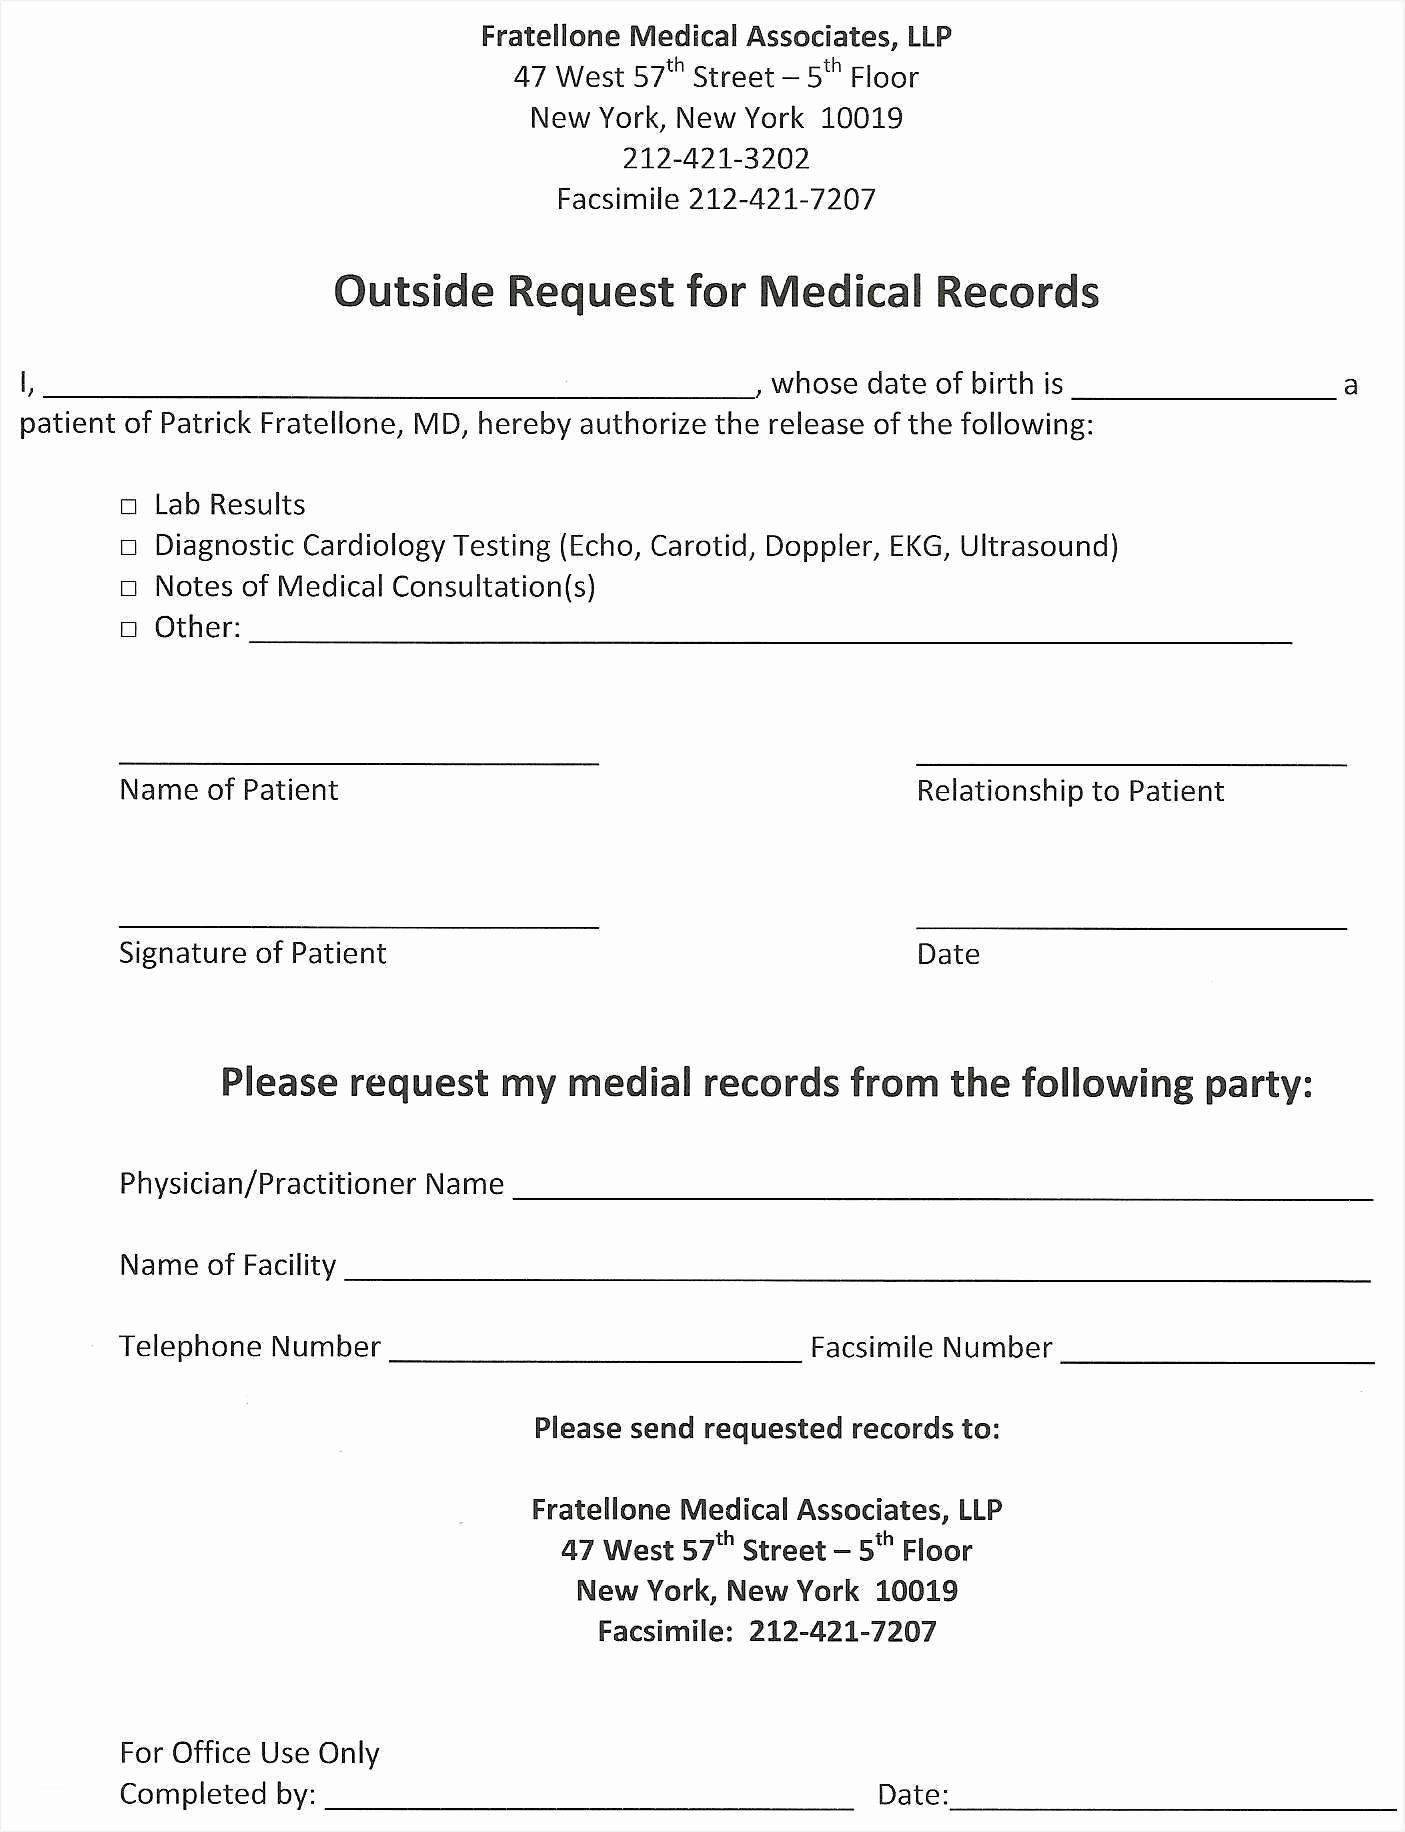 Invoice for Medical Records Template Elegant 10 Medical Records Request form Template